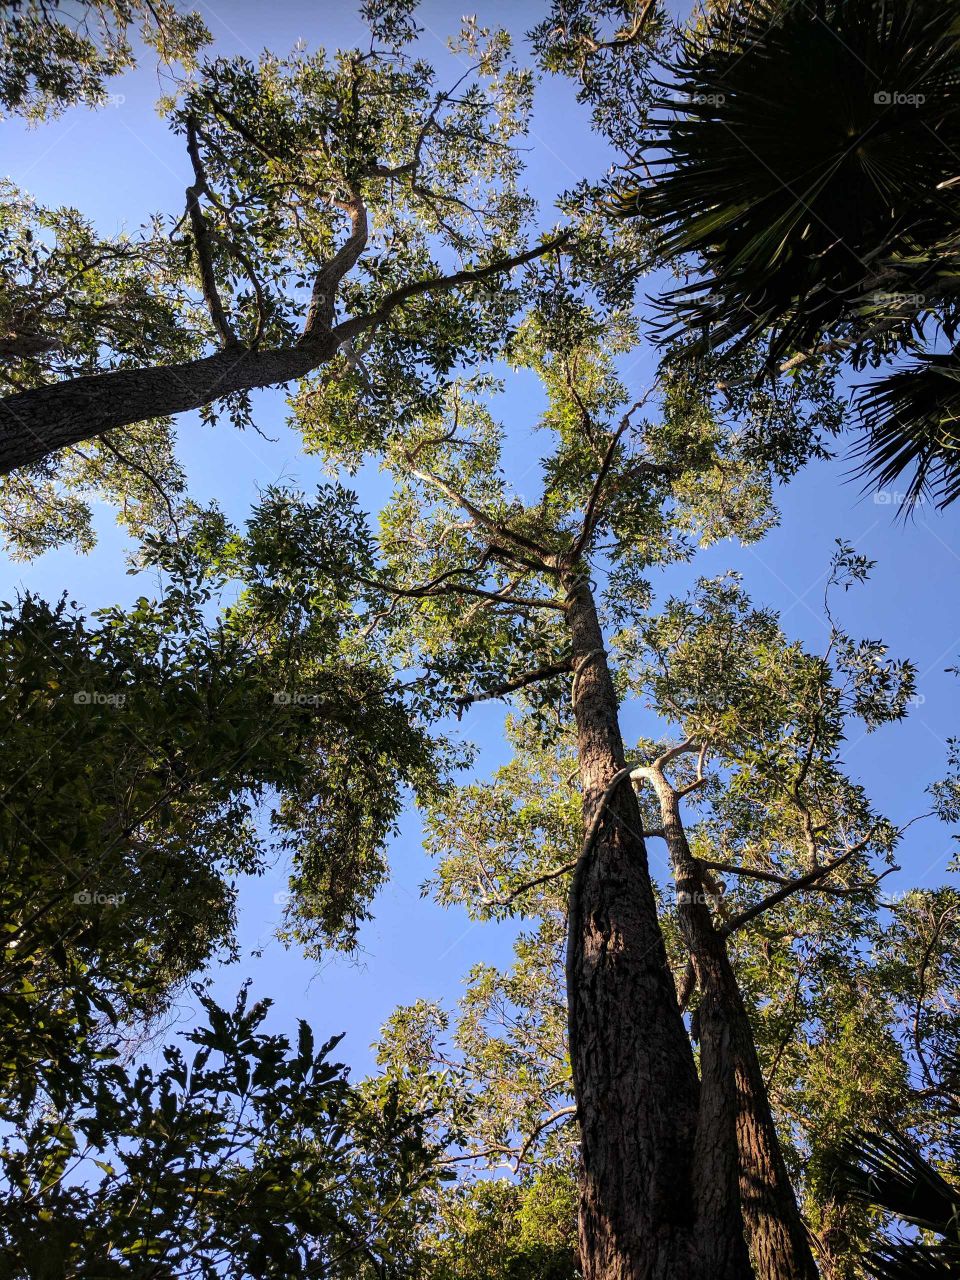 Tall green trees high up against a blue sky